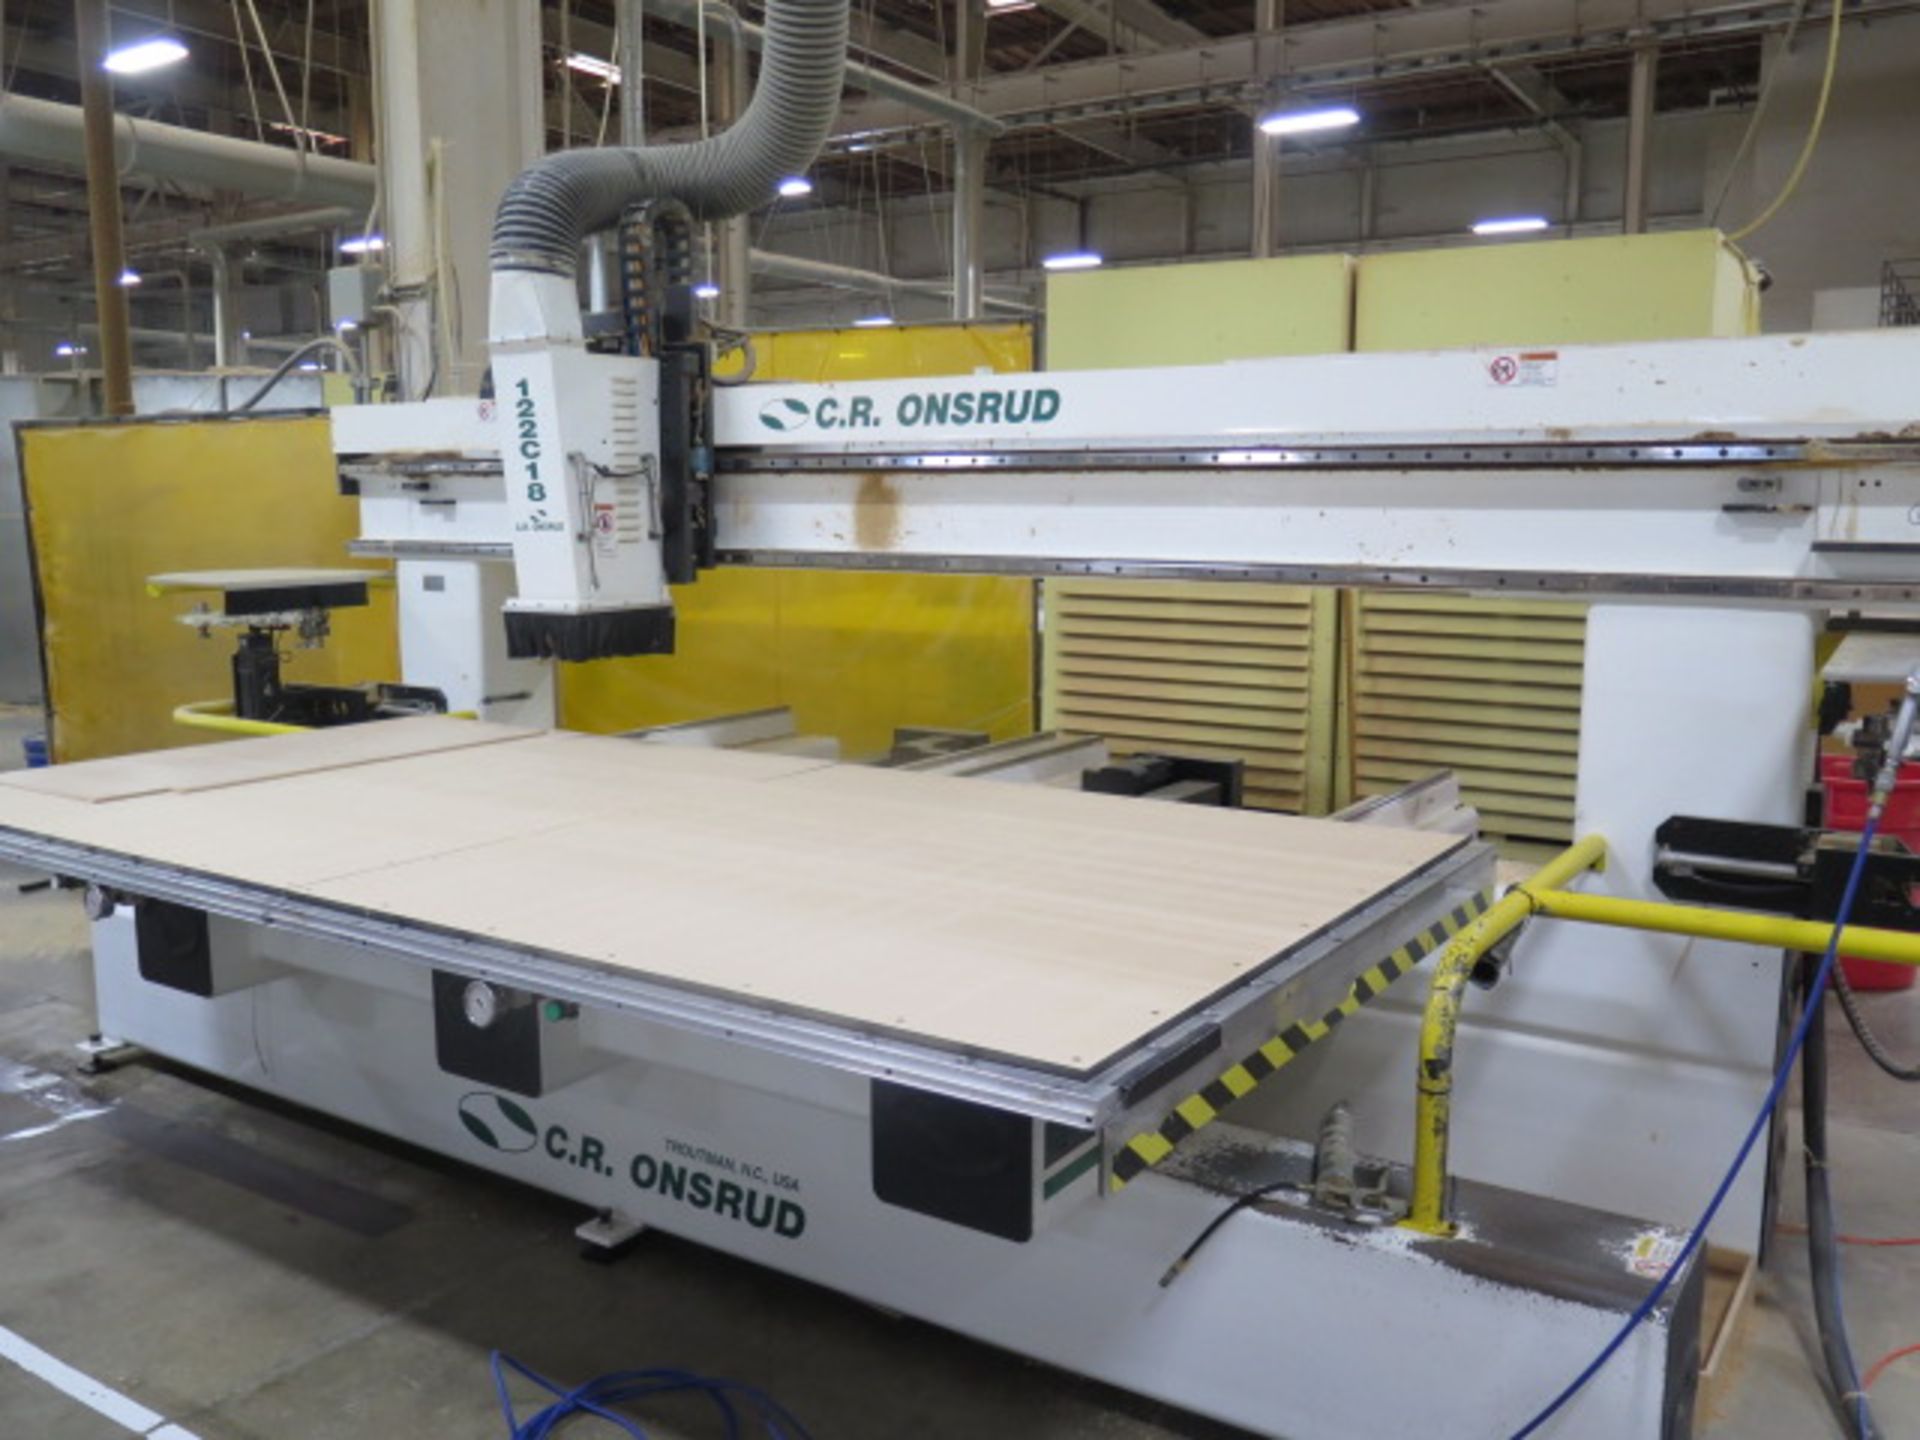 2008 C.R. Onsrud 122C18 CNC Router s/n 12280701 w/ WinMedia CNC Controls, SOLD AS IS - Image 3 of 18